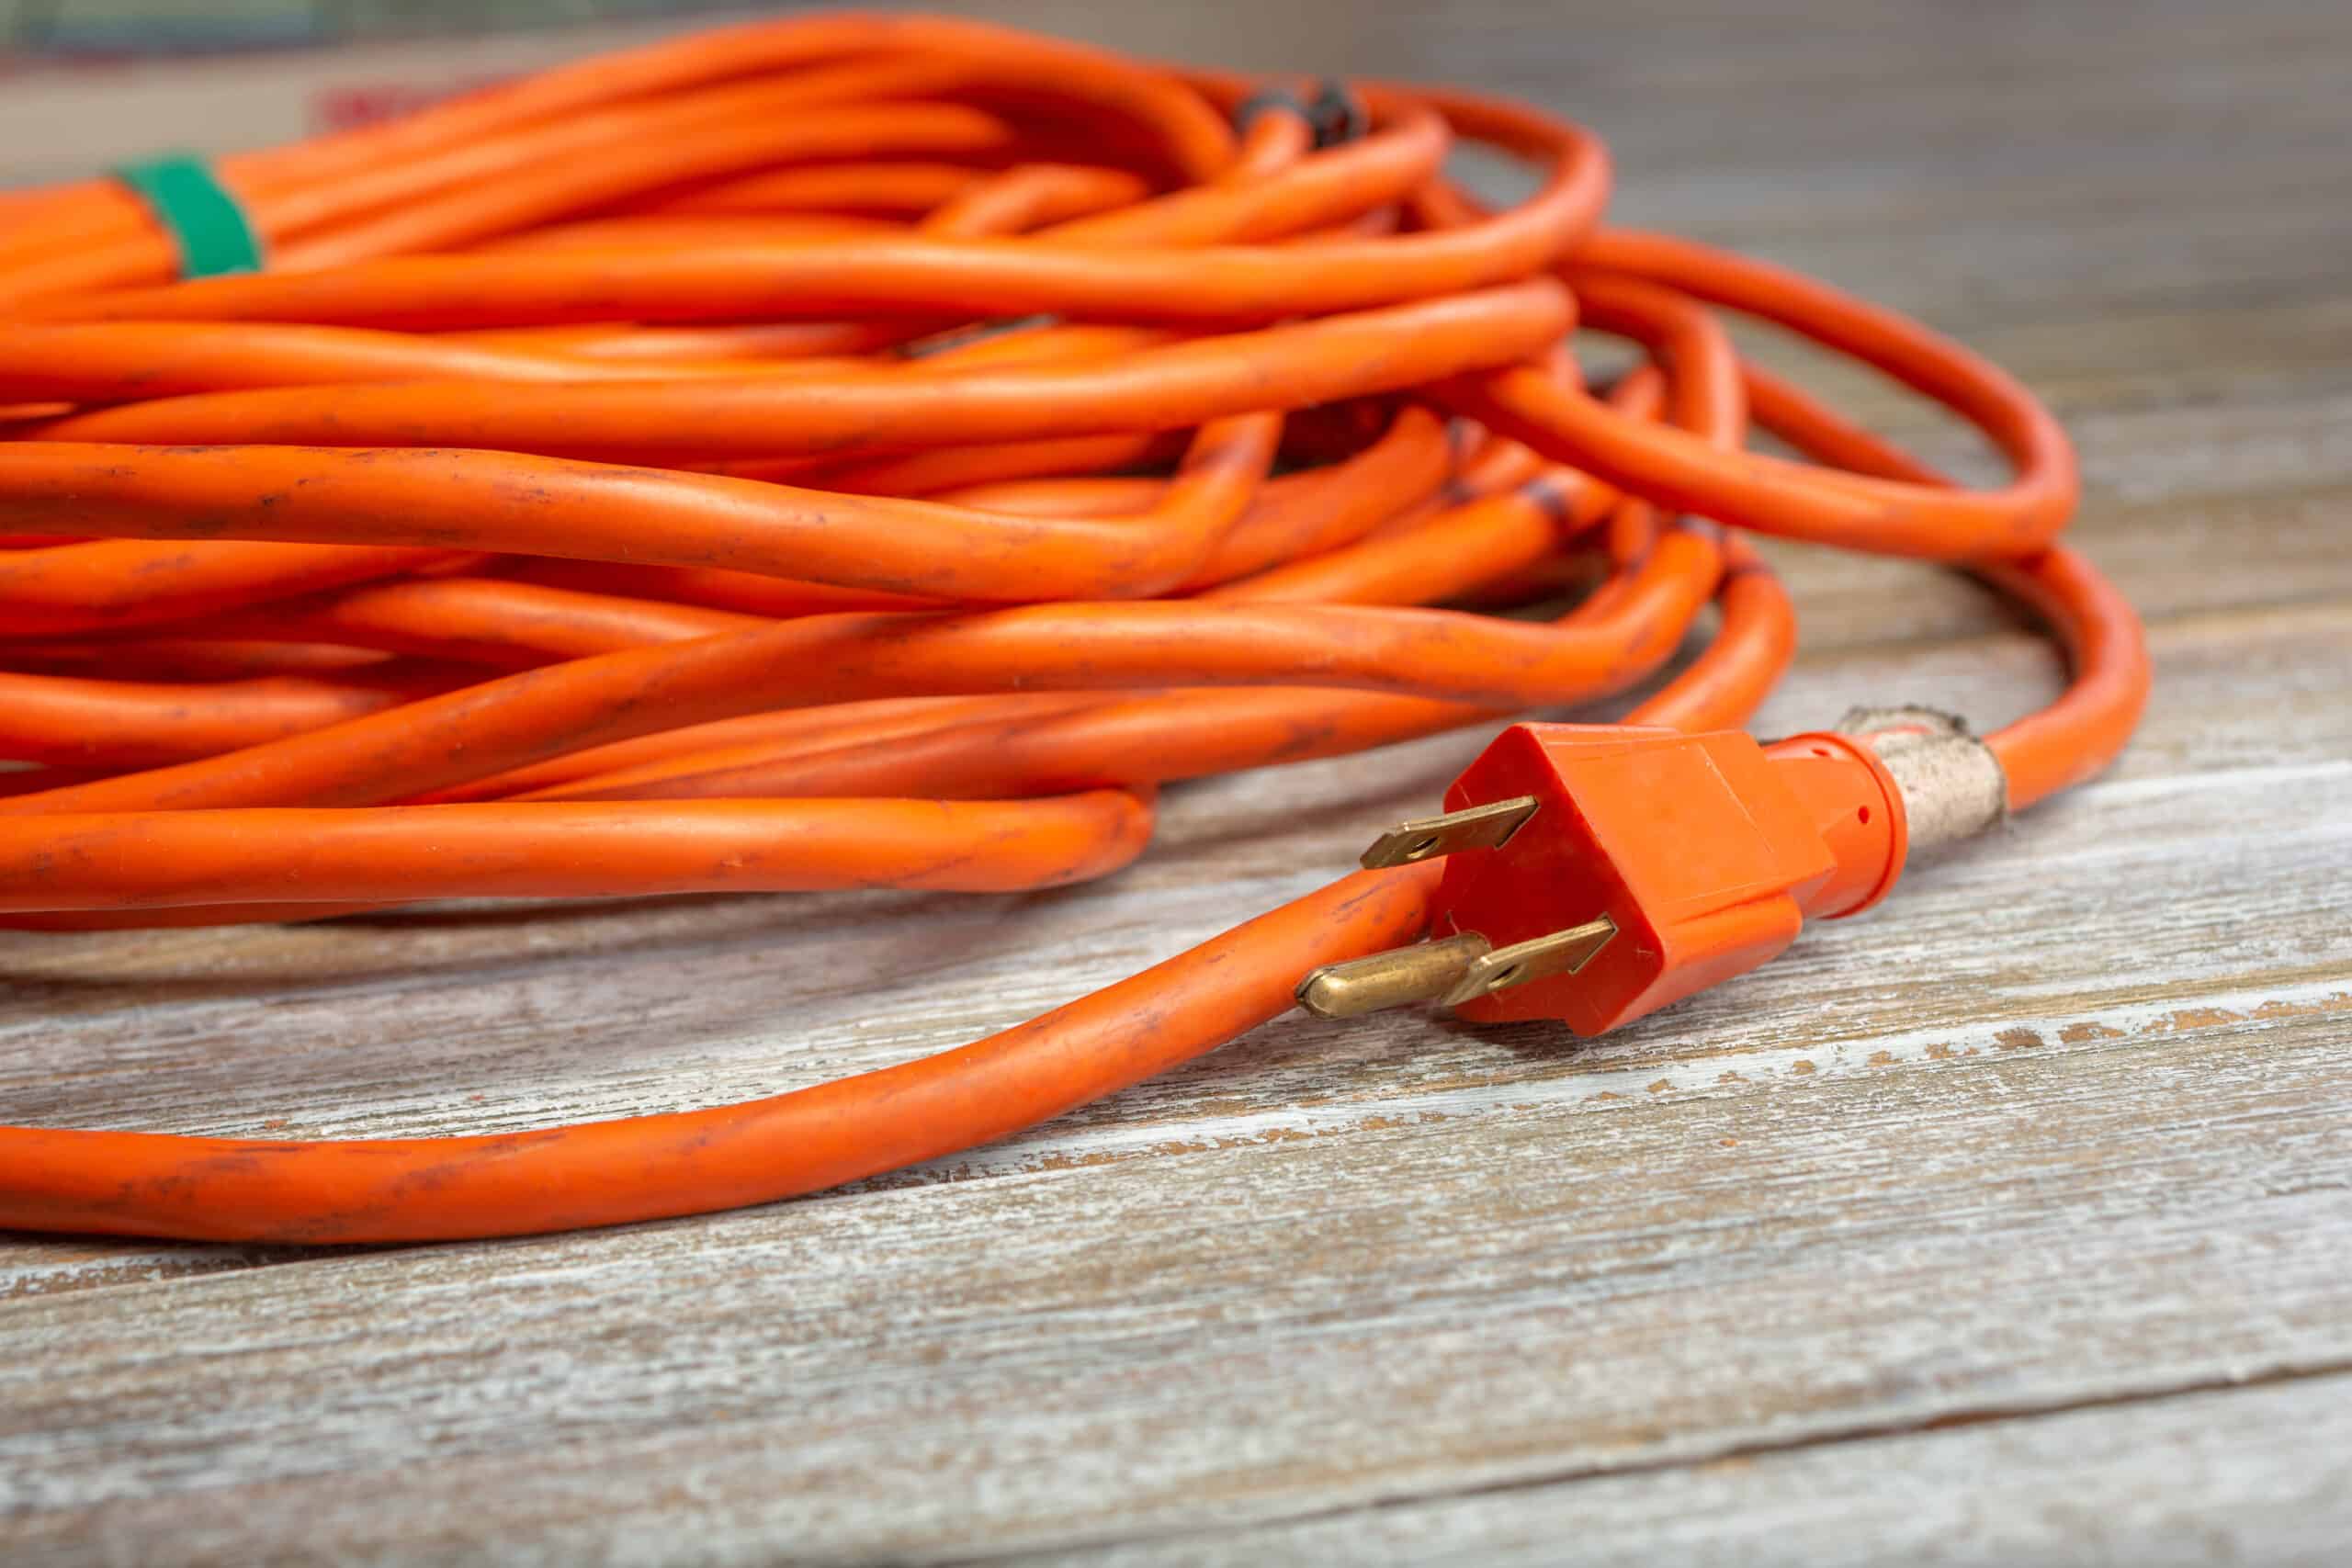 A closeup view of a wrapped orange extension cord featuring the